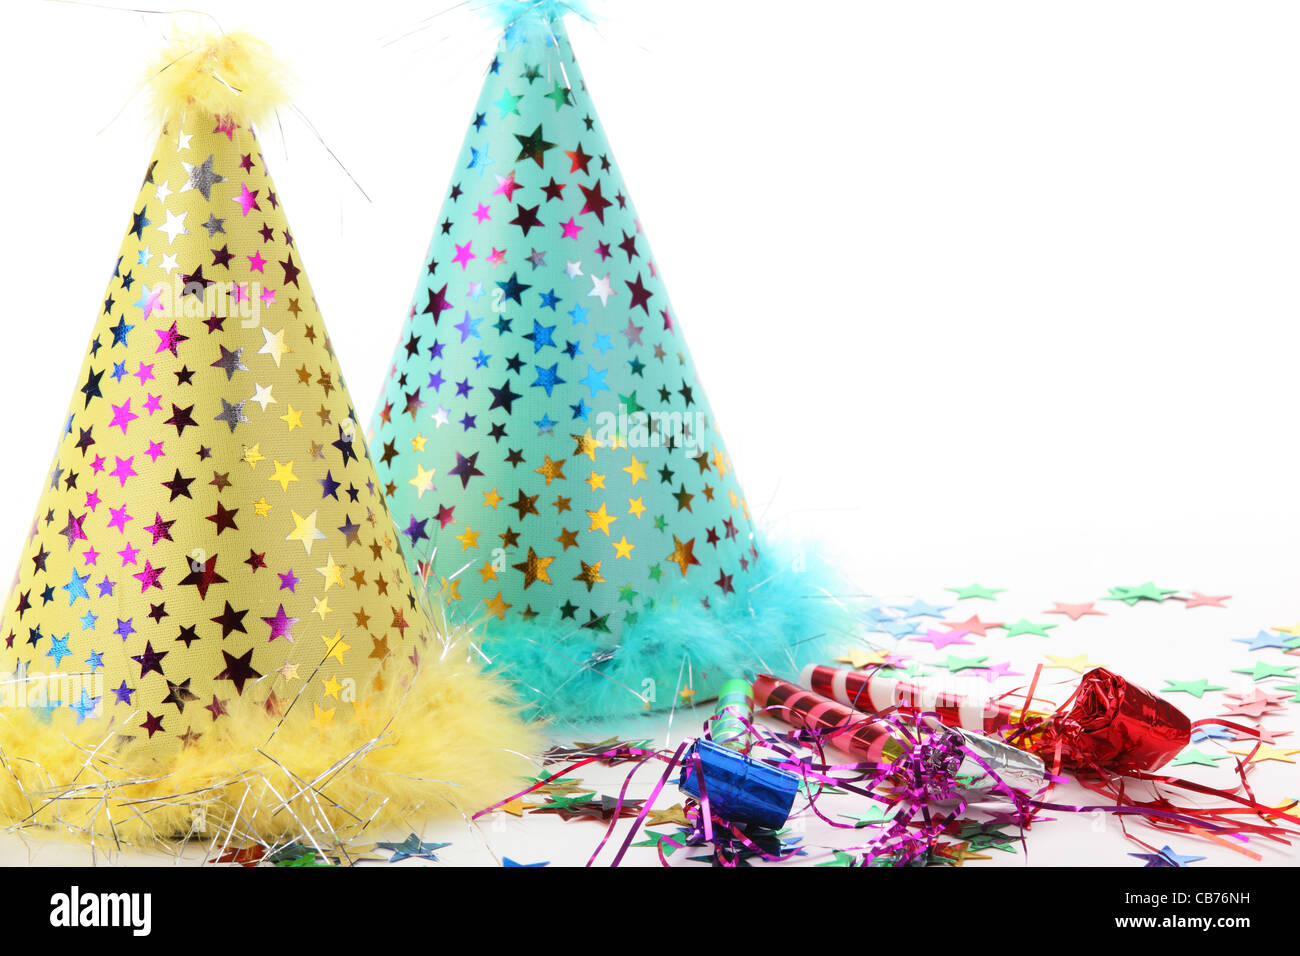 New Year's Party Decoration. Stock Photo